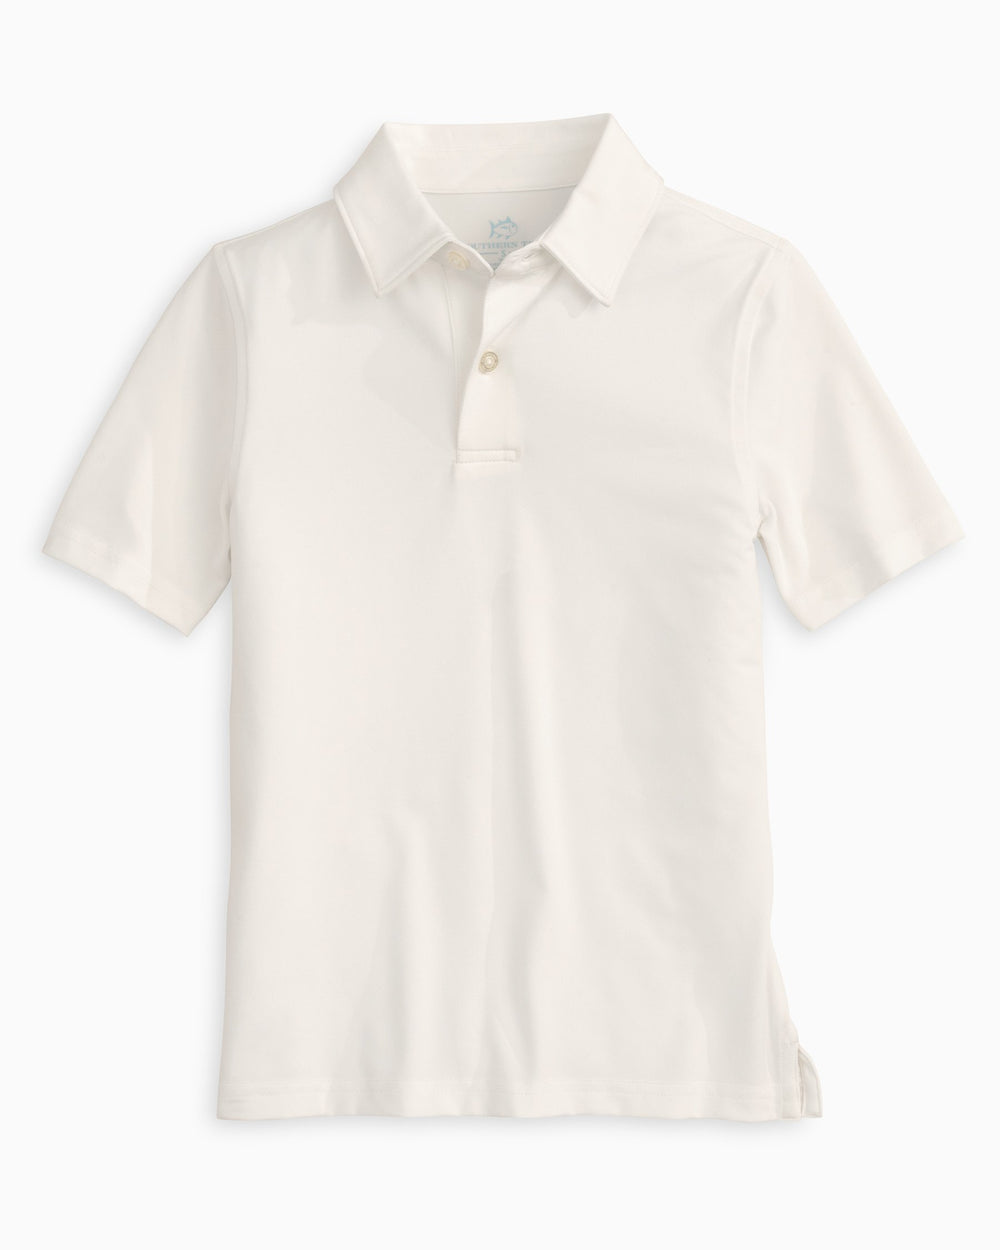 The front view of the Boys Driver Performance Polo Shirt by Southern Tide - Classic White